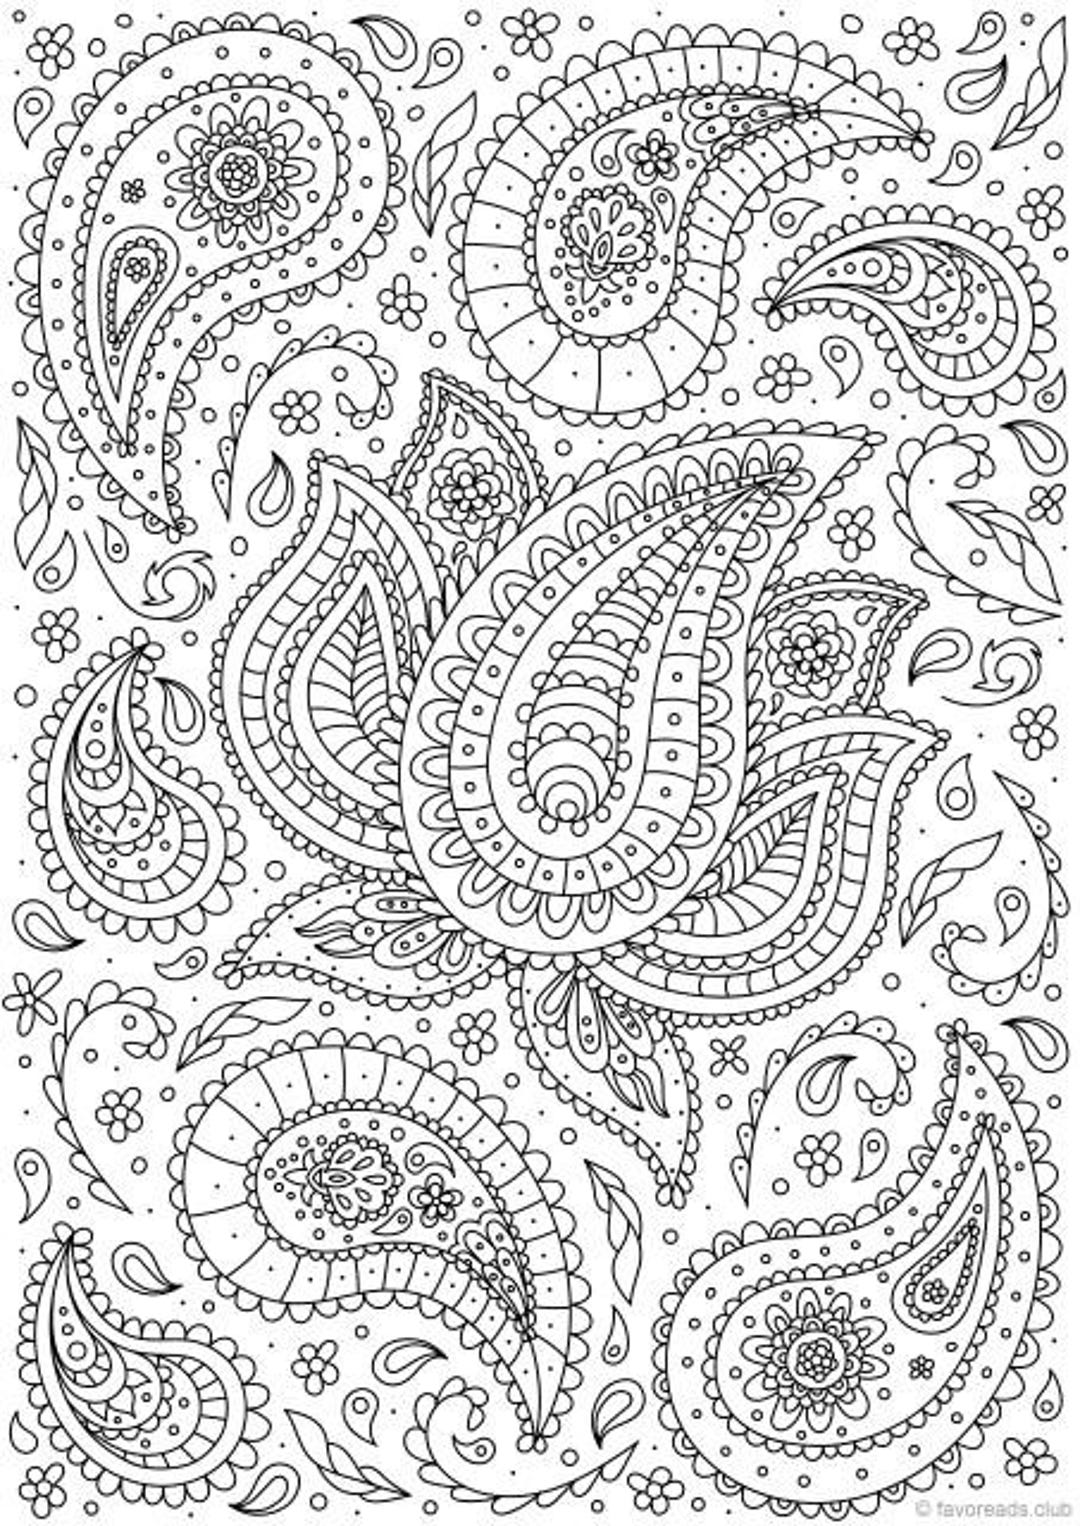 Paisley Flower Printable Adult Coloring Page From (Instant Download) - Etsy